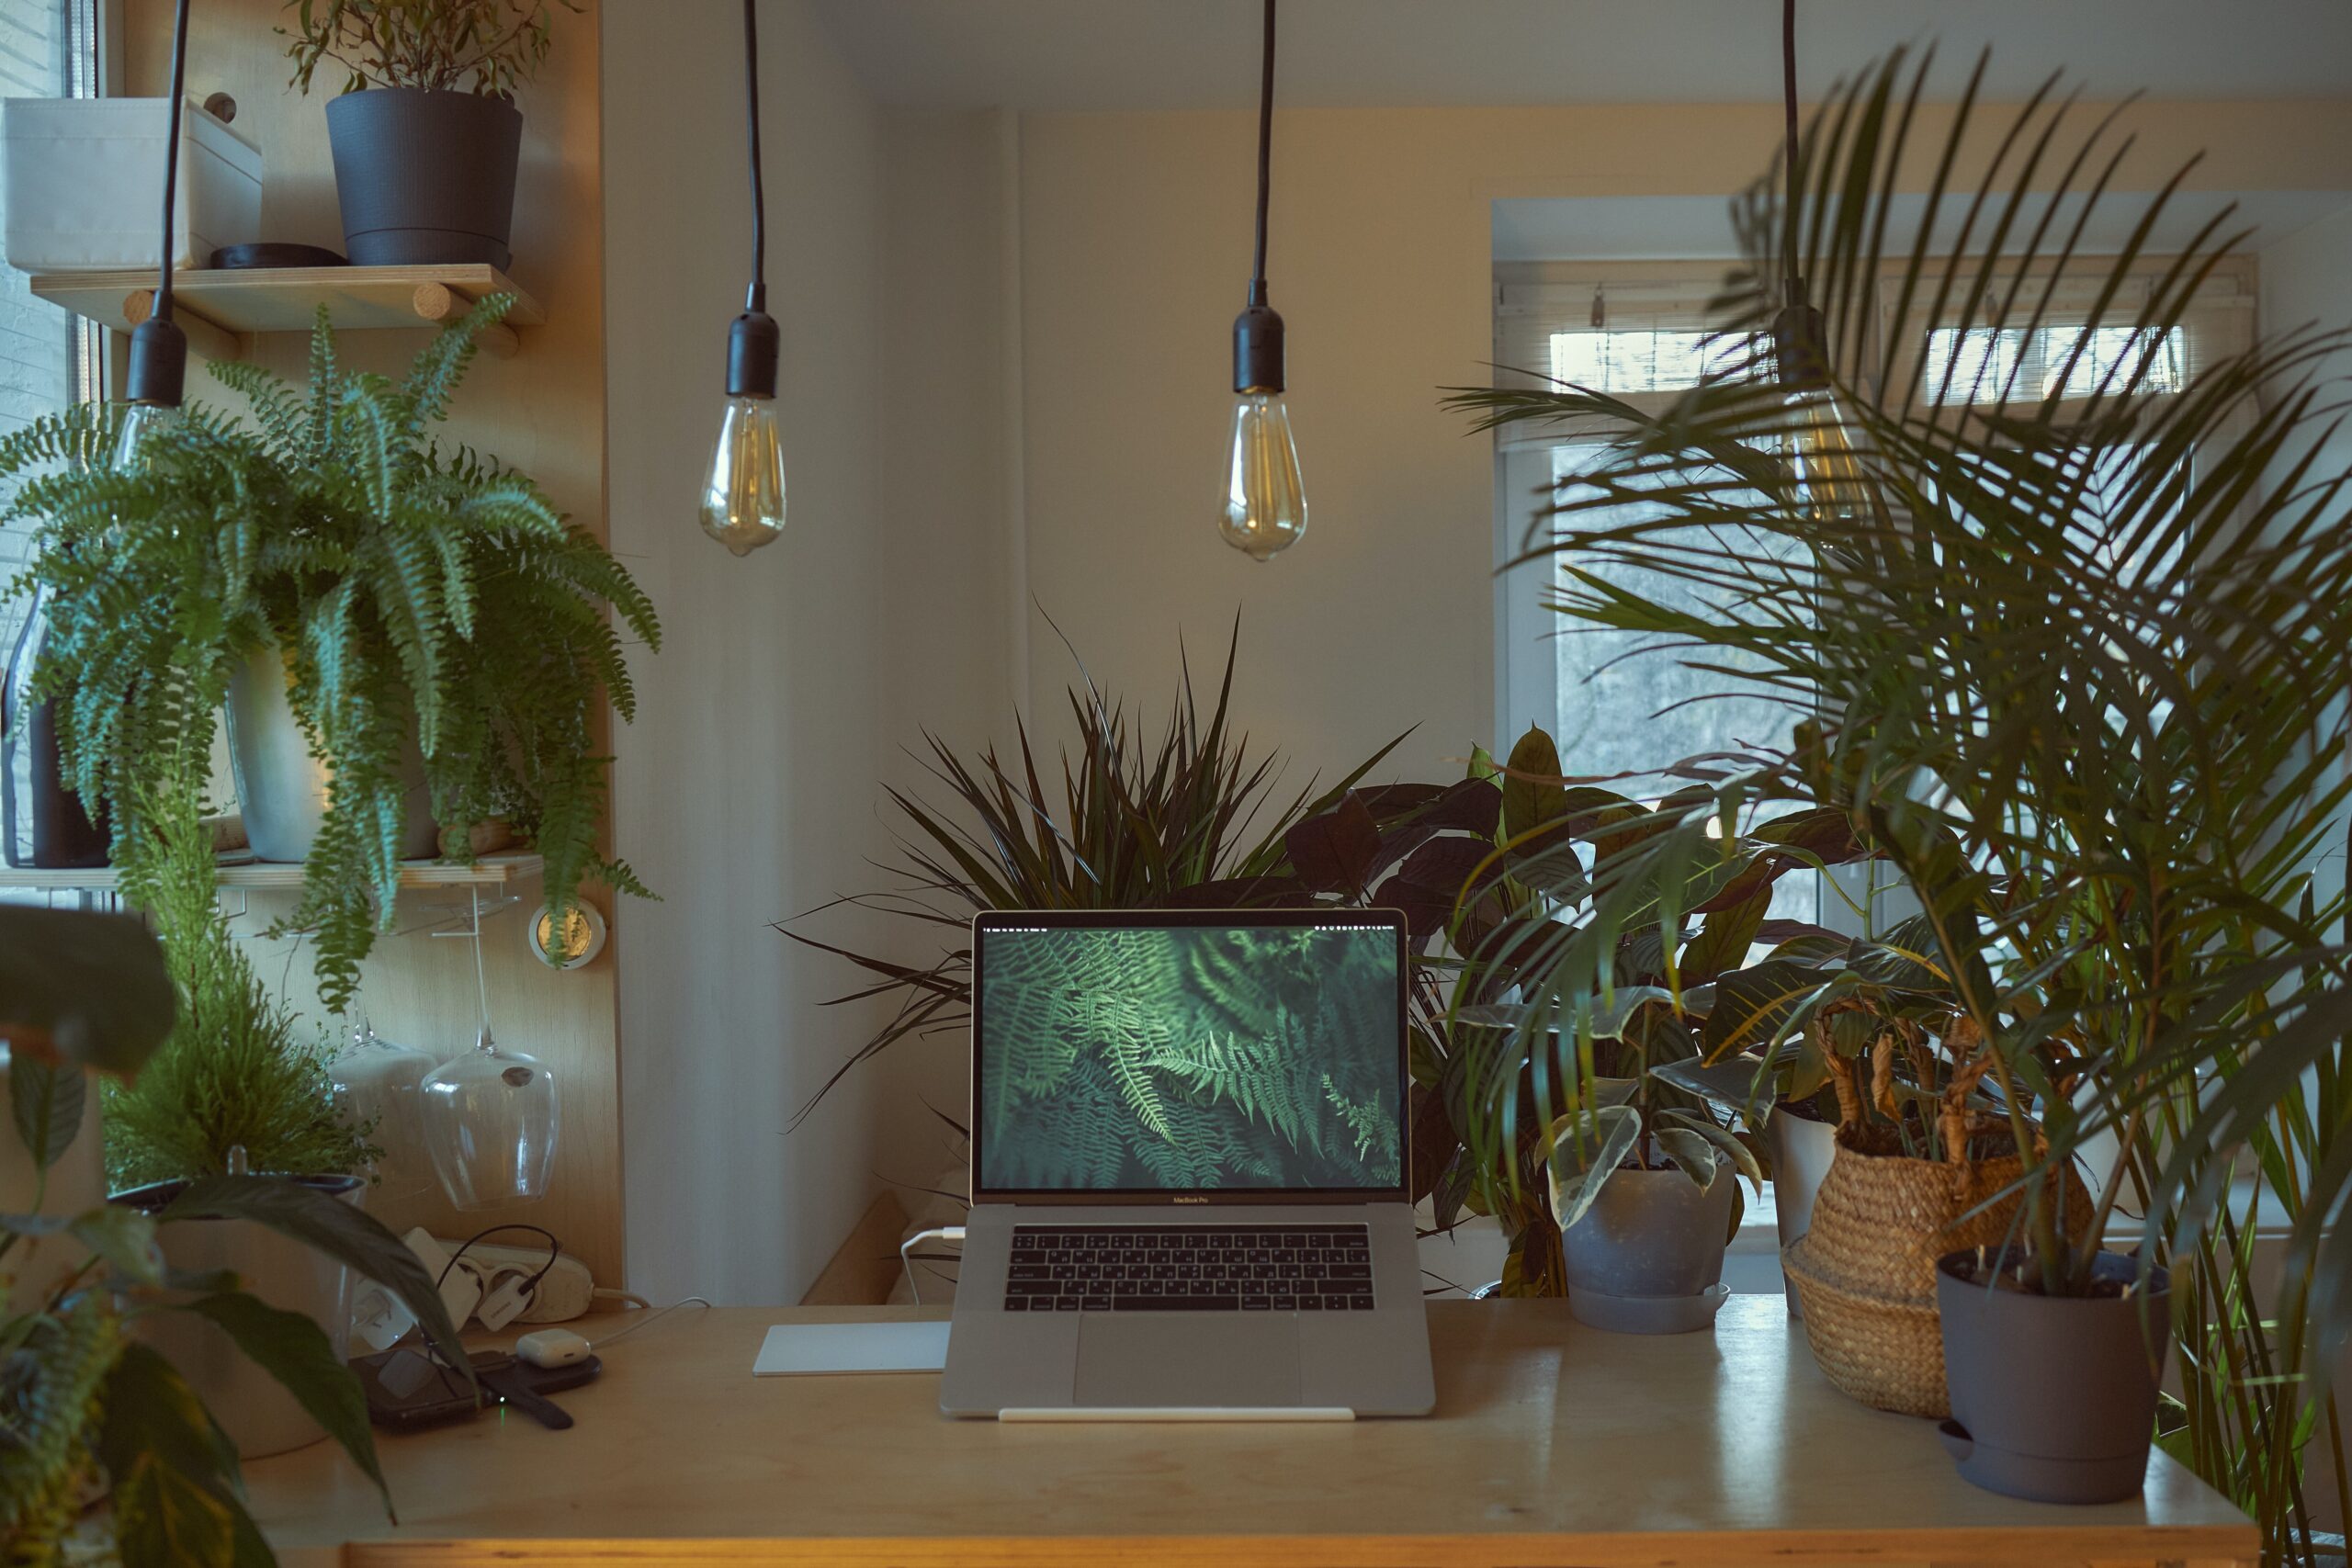 Thanks to biophilic design, plants stimulate well-being at work